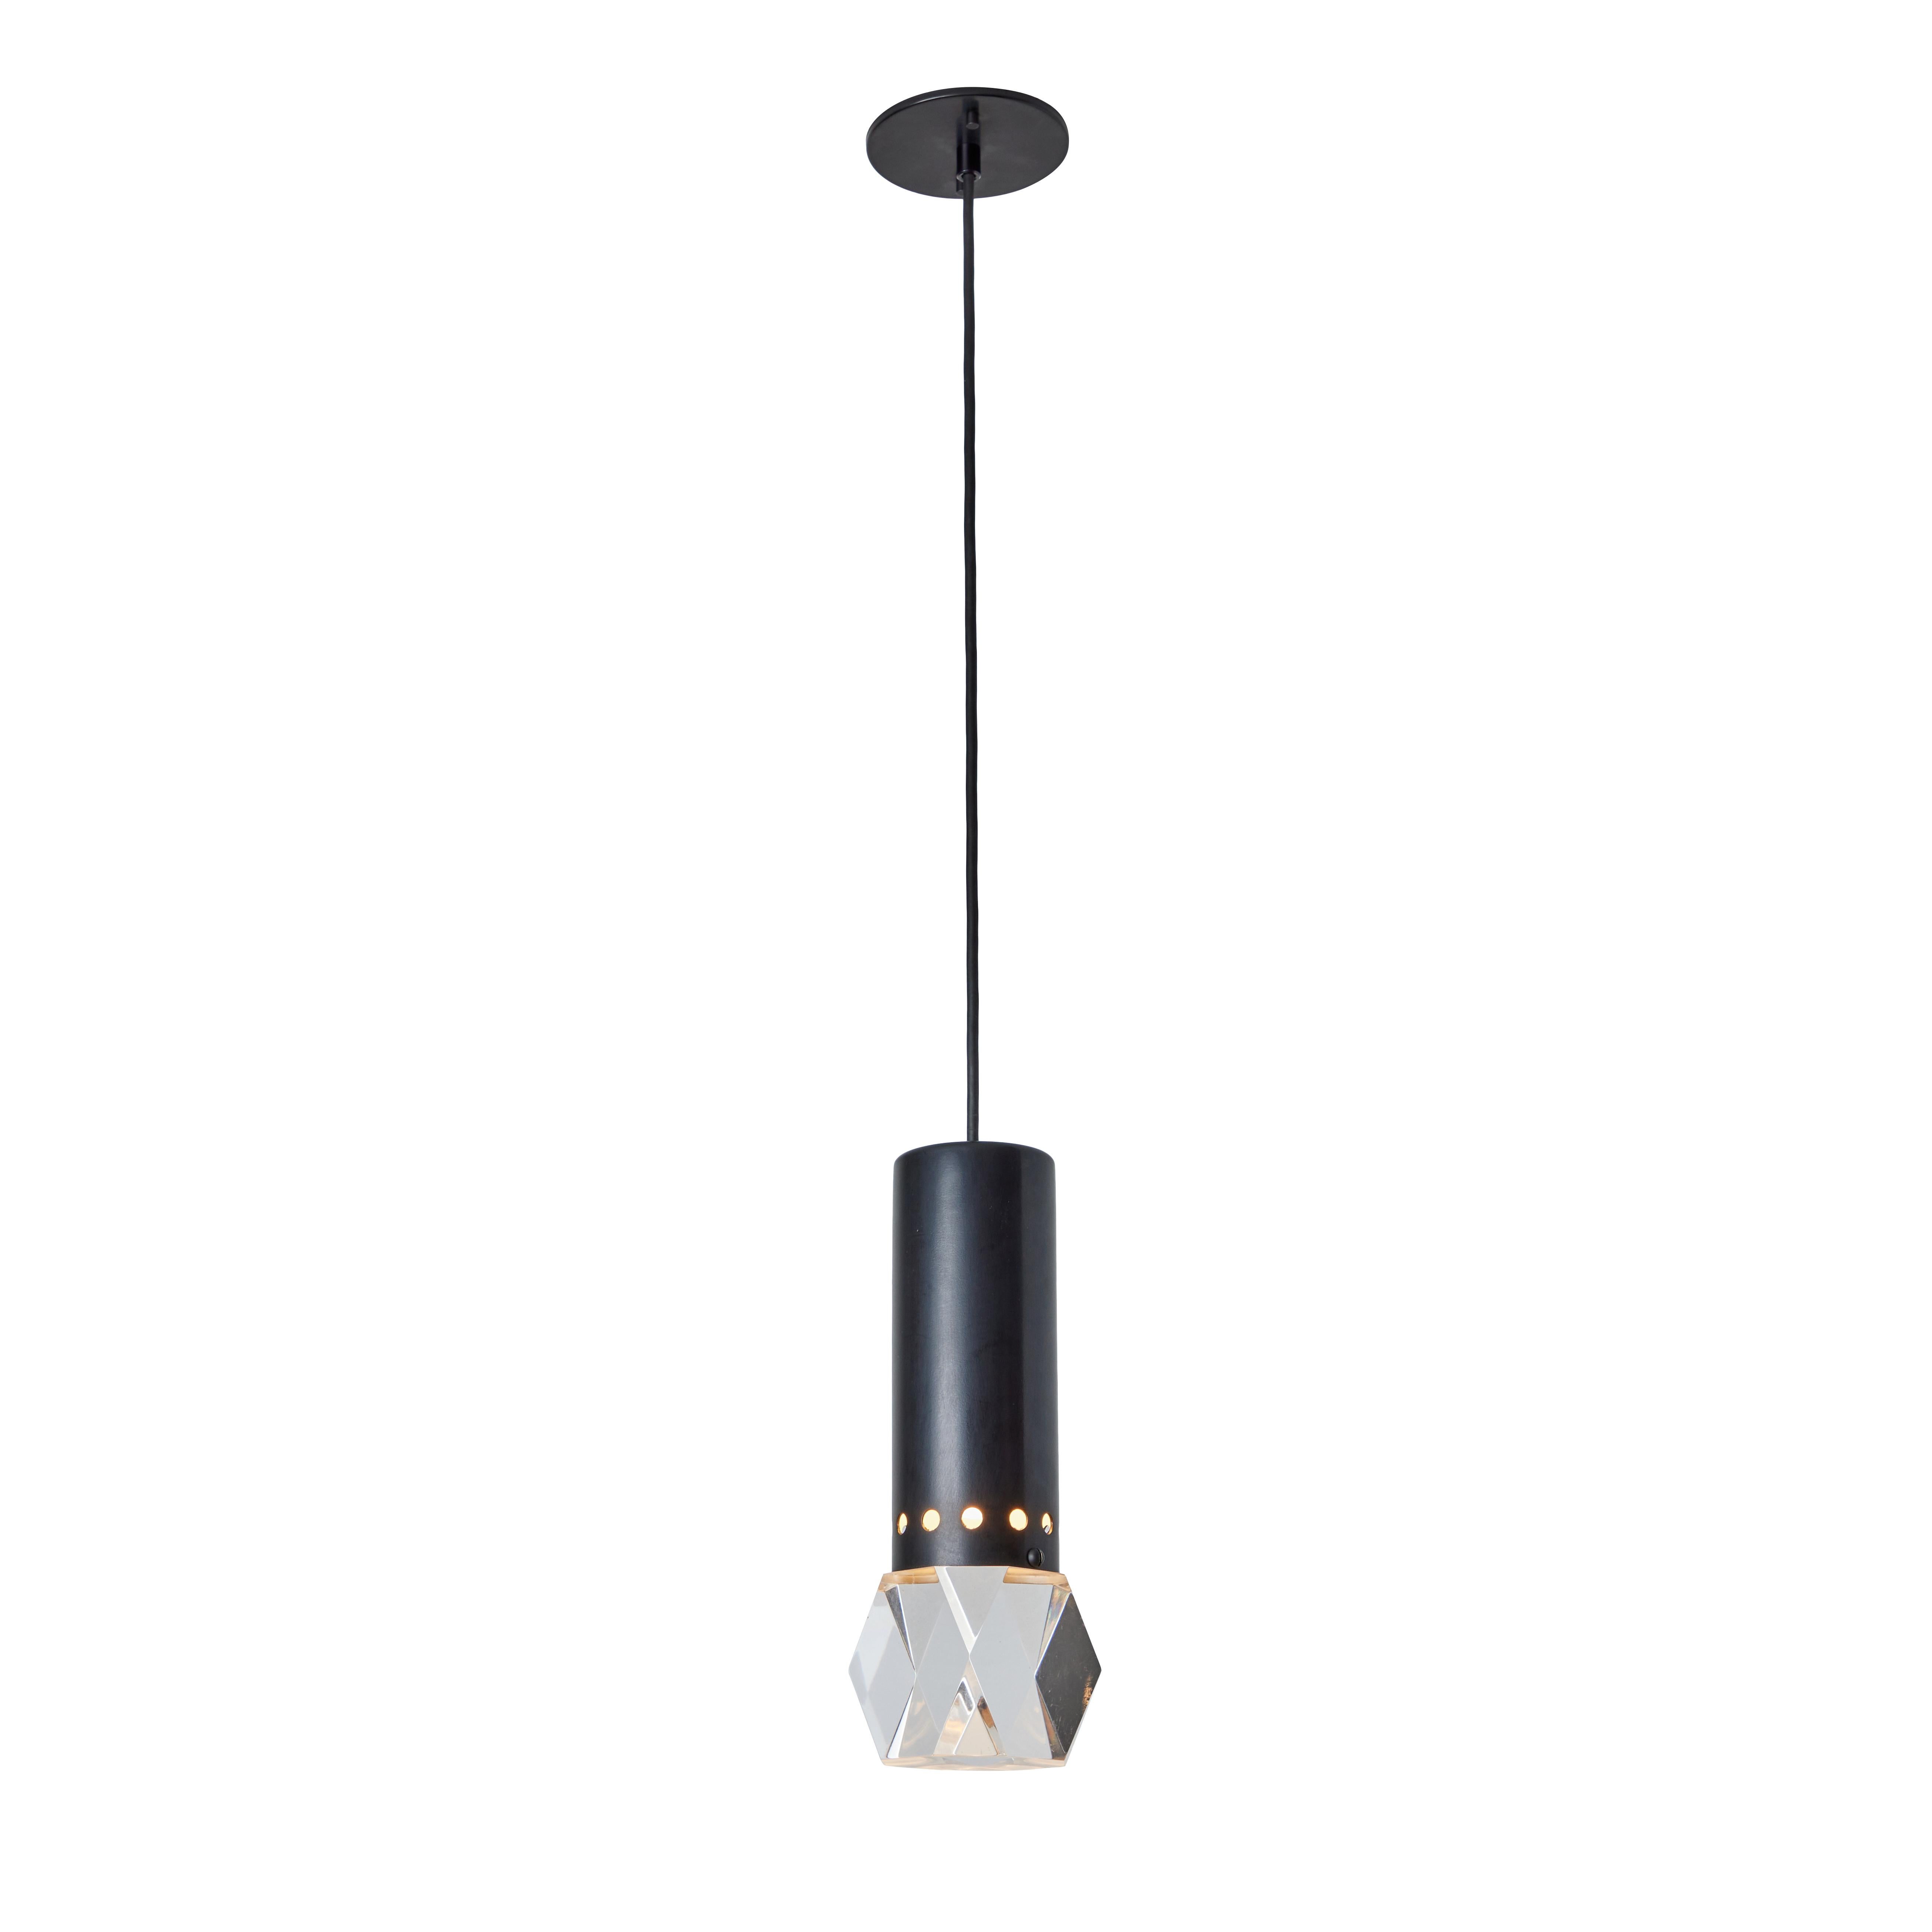 Large 1960s Stilnovo faceted diffuser pendant lamp. Executed in black painted perforated metal and a faceted lucite diffuser. A sculptural and refined design characteristic of midcentury Italian design at its highest level. 

Stilnovo was one of the